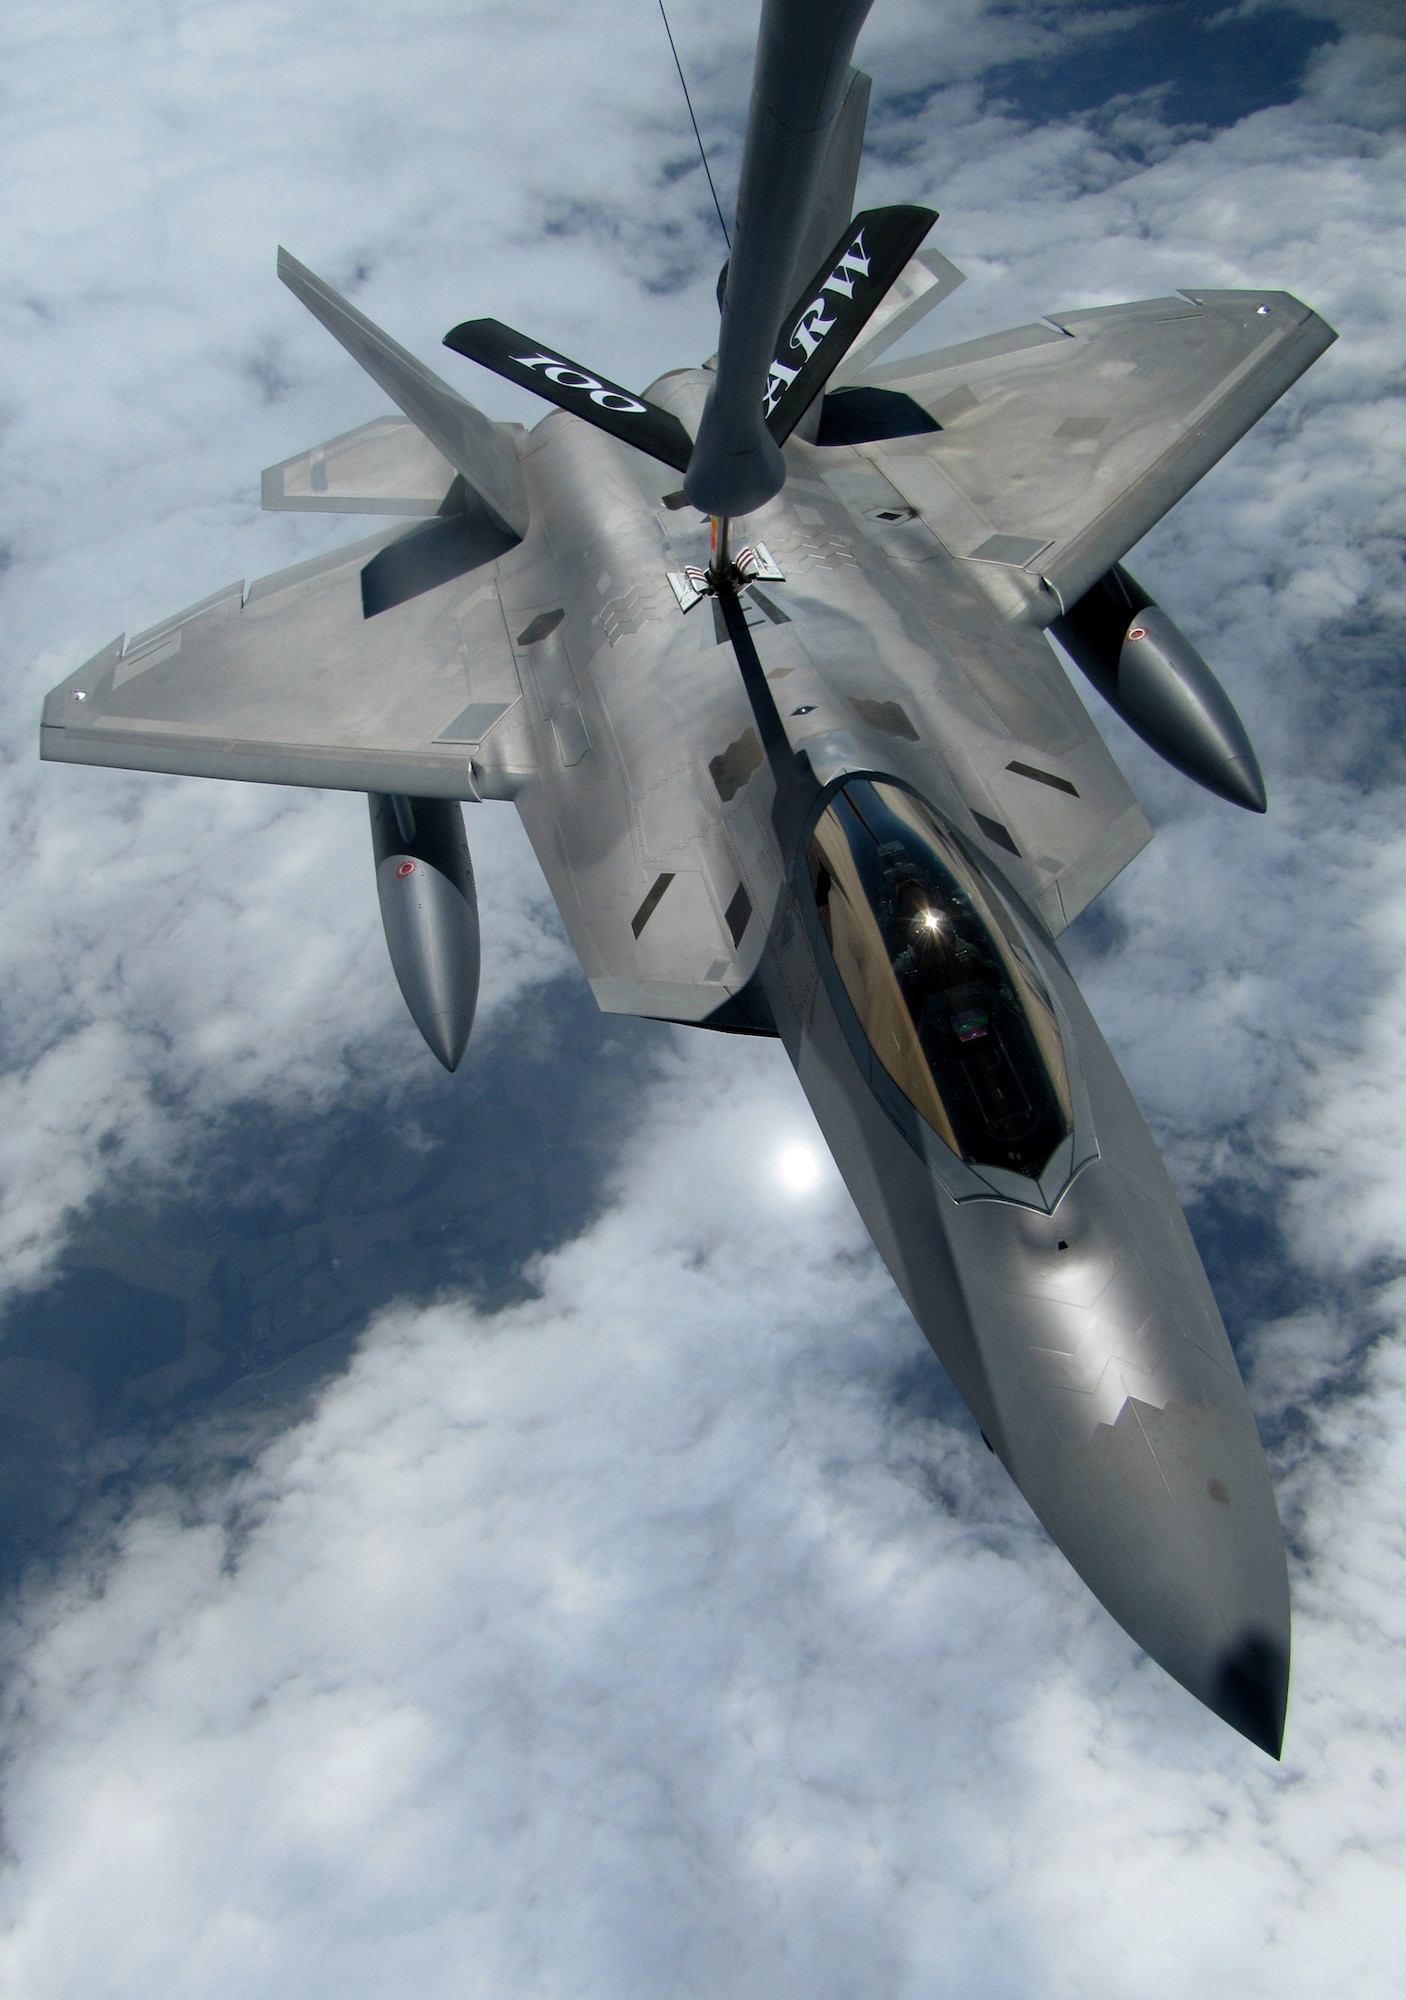 RAF MILDENHALL, England -- An F-22 Raptor from Elmendorf Air Force Base, Alaska, takes gas from a 100th Air Refueling Wing KC-135 Stratotanker July 27.  By flying with a tanker, the fighter could routinely fill its fuel tanks to ensure it had enough fuel to reach a safe base in the event it had to land.  (U.S. Air Force photo/Staff Sgt. Austin M. May)